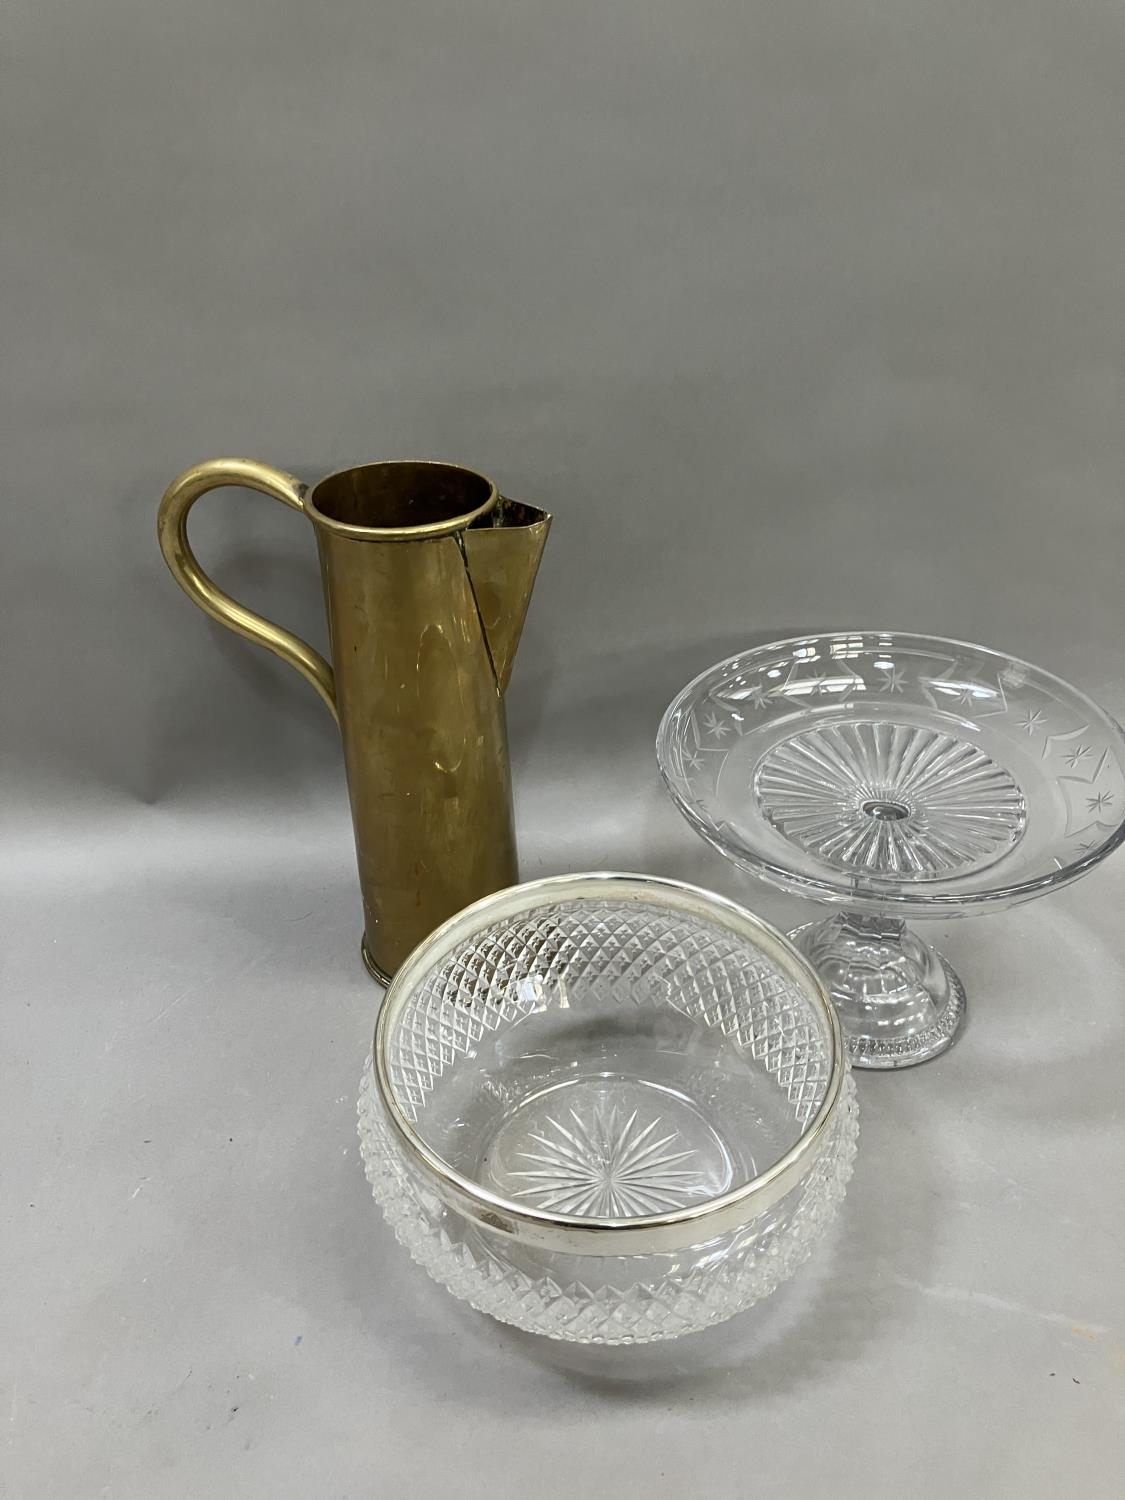 A Mappin and Webb cut glass dessert bowl, an etched and moulded brass tazza and a brass jug formed - Image 2 of 4